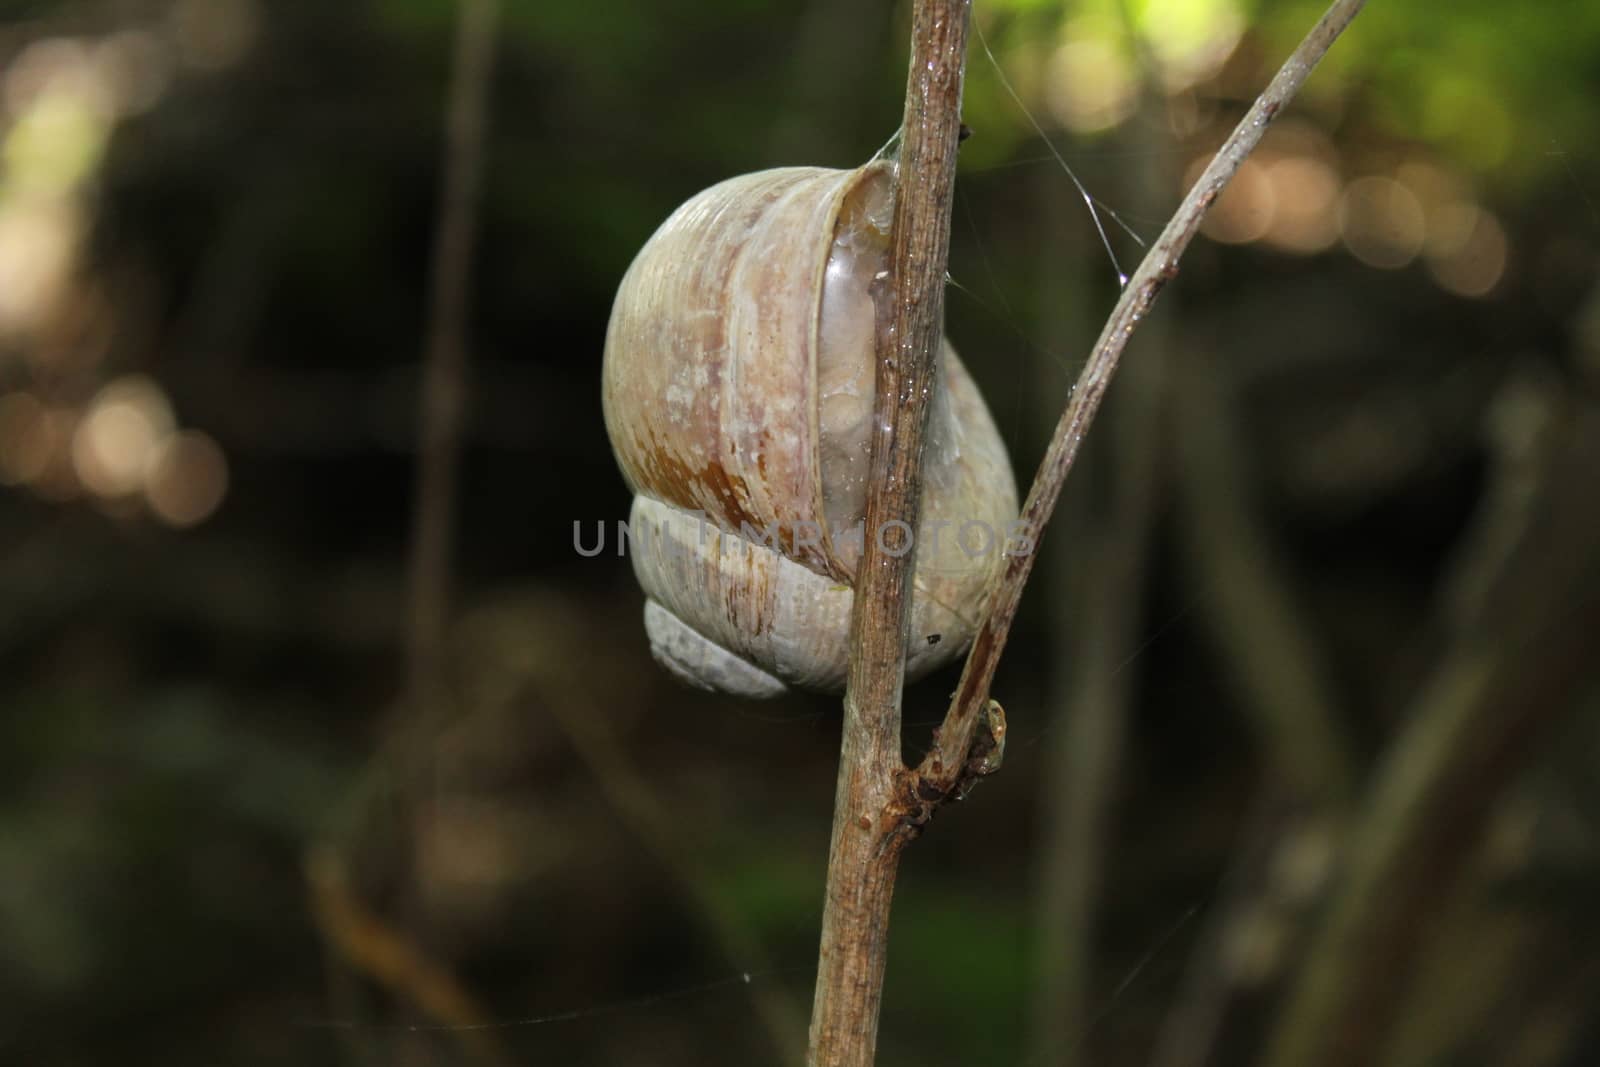 The picture shows vineyard snail in the forest.